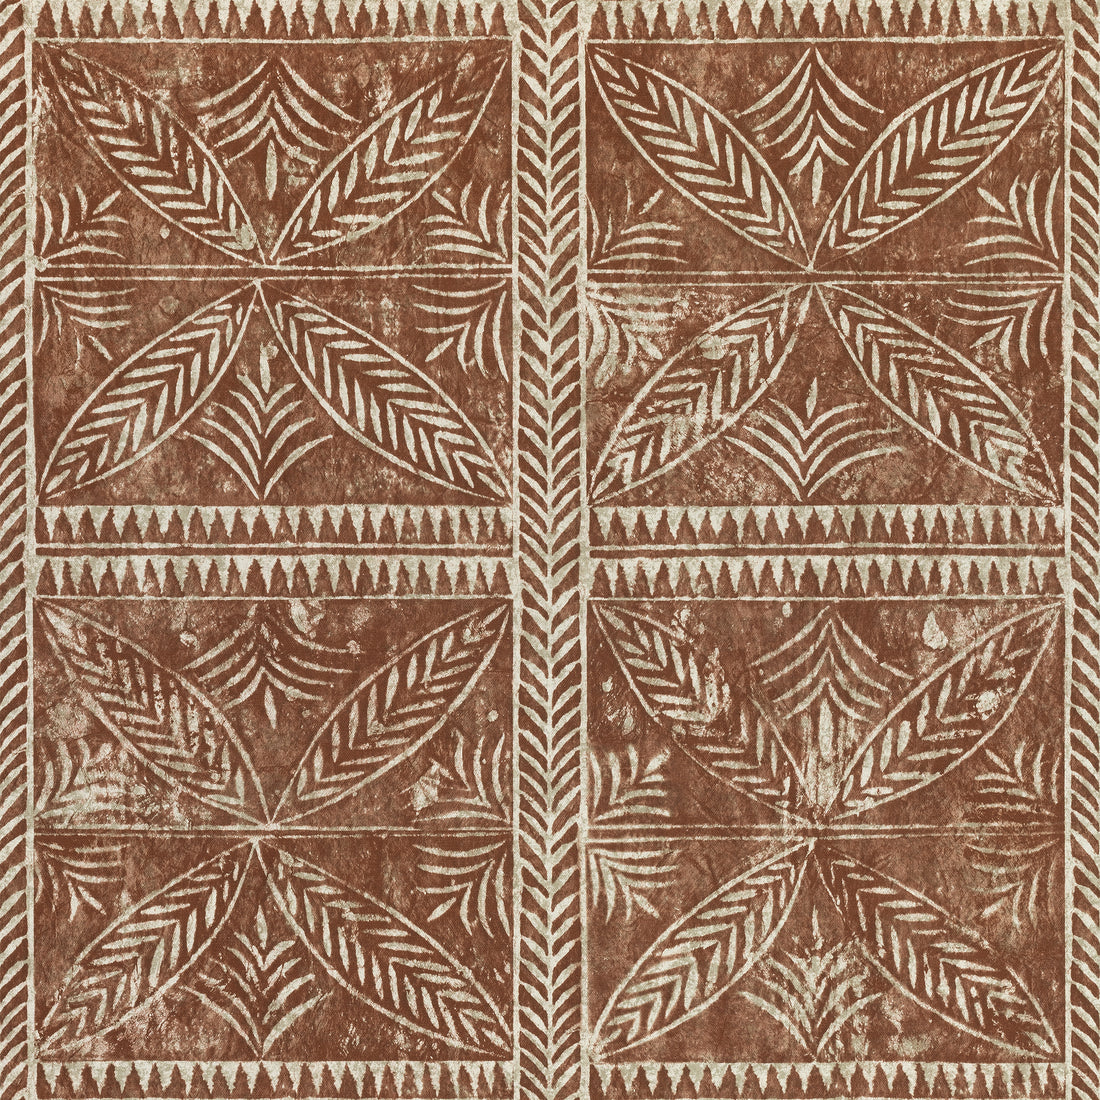 Timbuktu fabric in tobacco color - pattern number F910252 - by Thibaut in the Colony collection